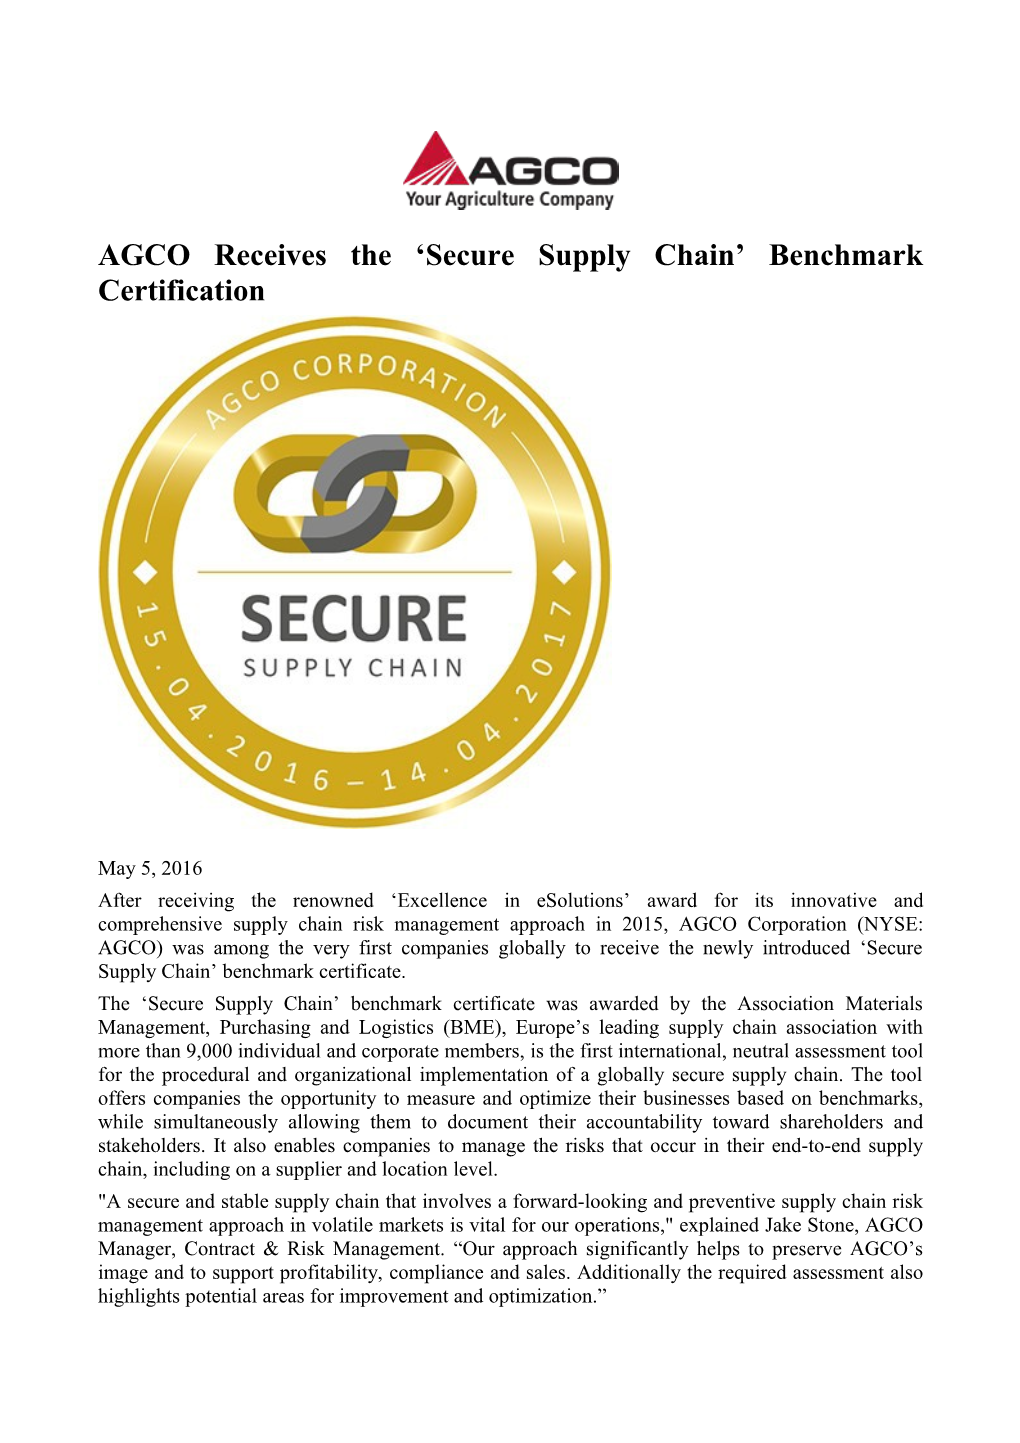 AGCO Receives the Secure Supply Chain Benchmark Certification